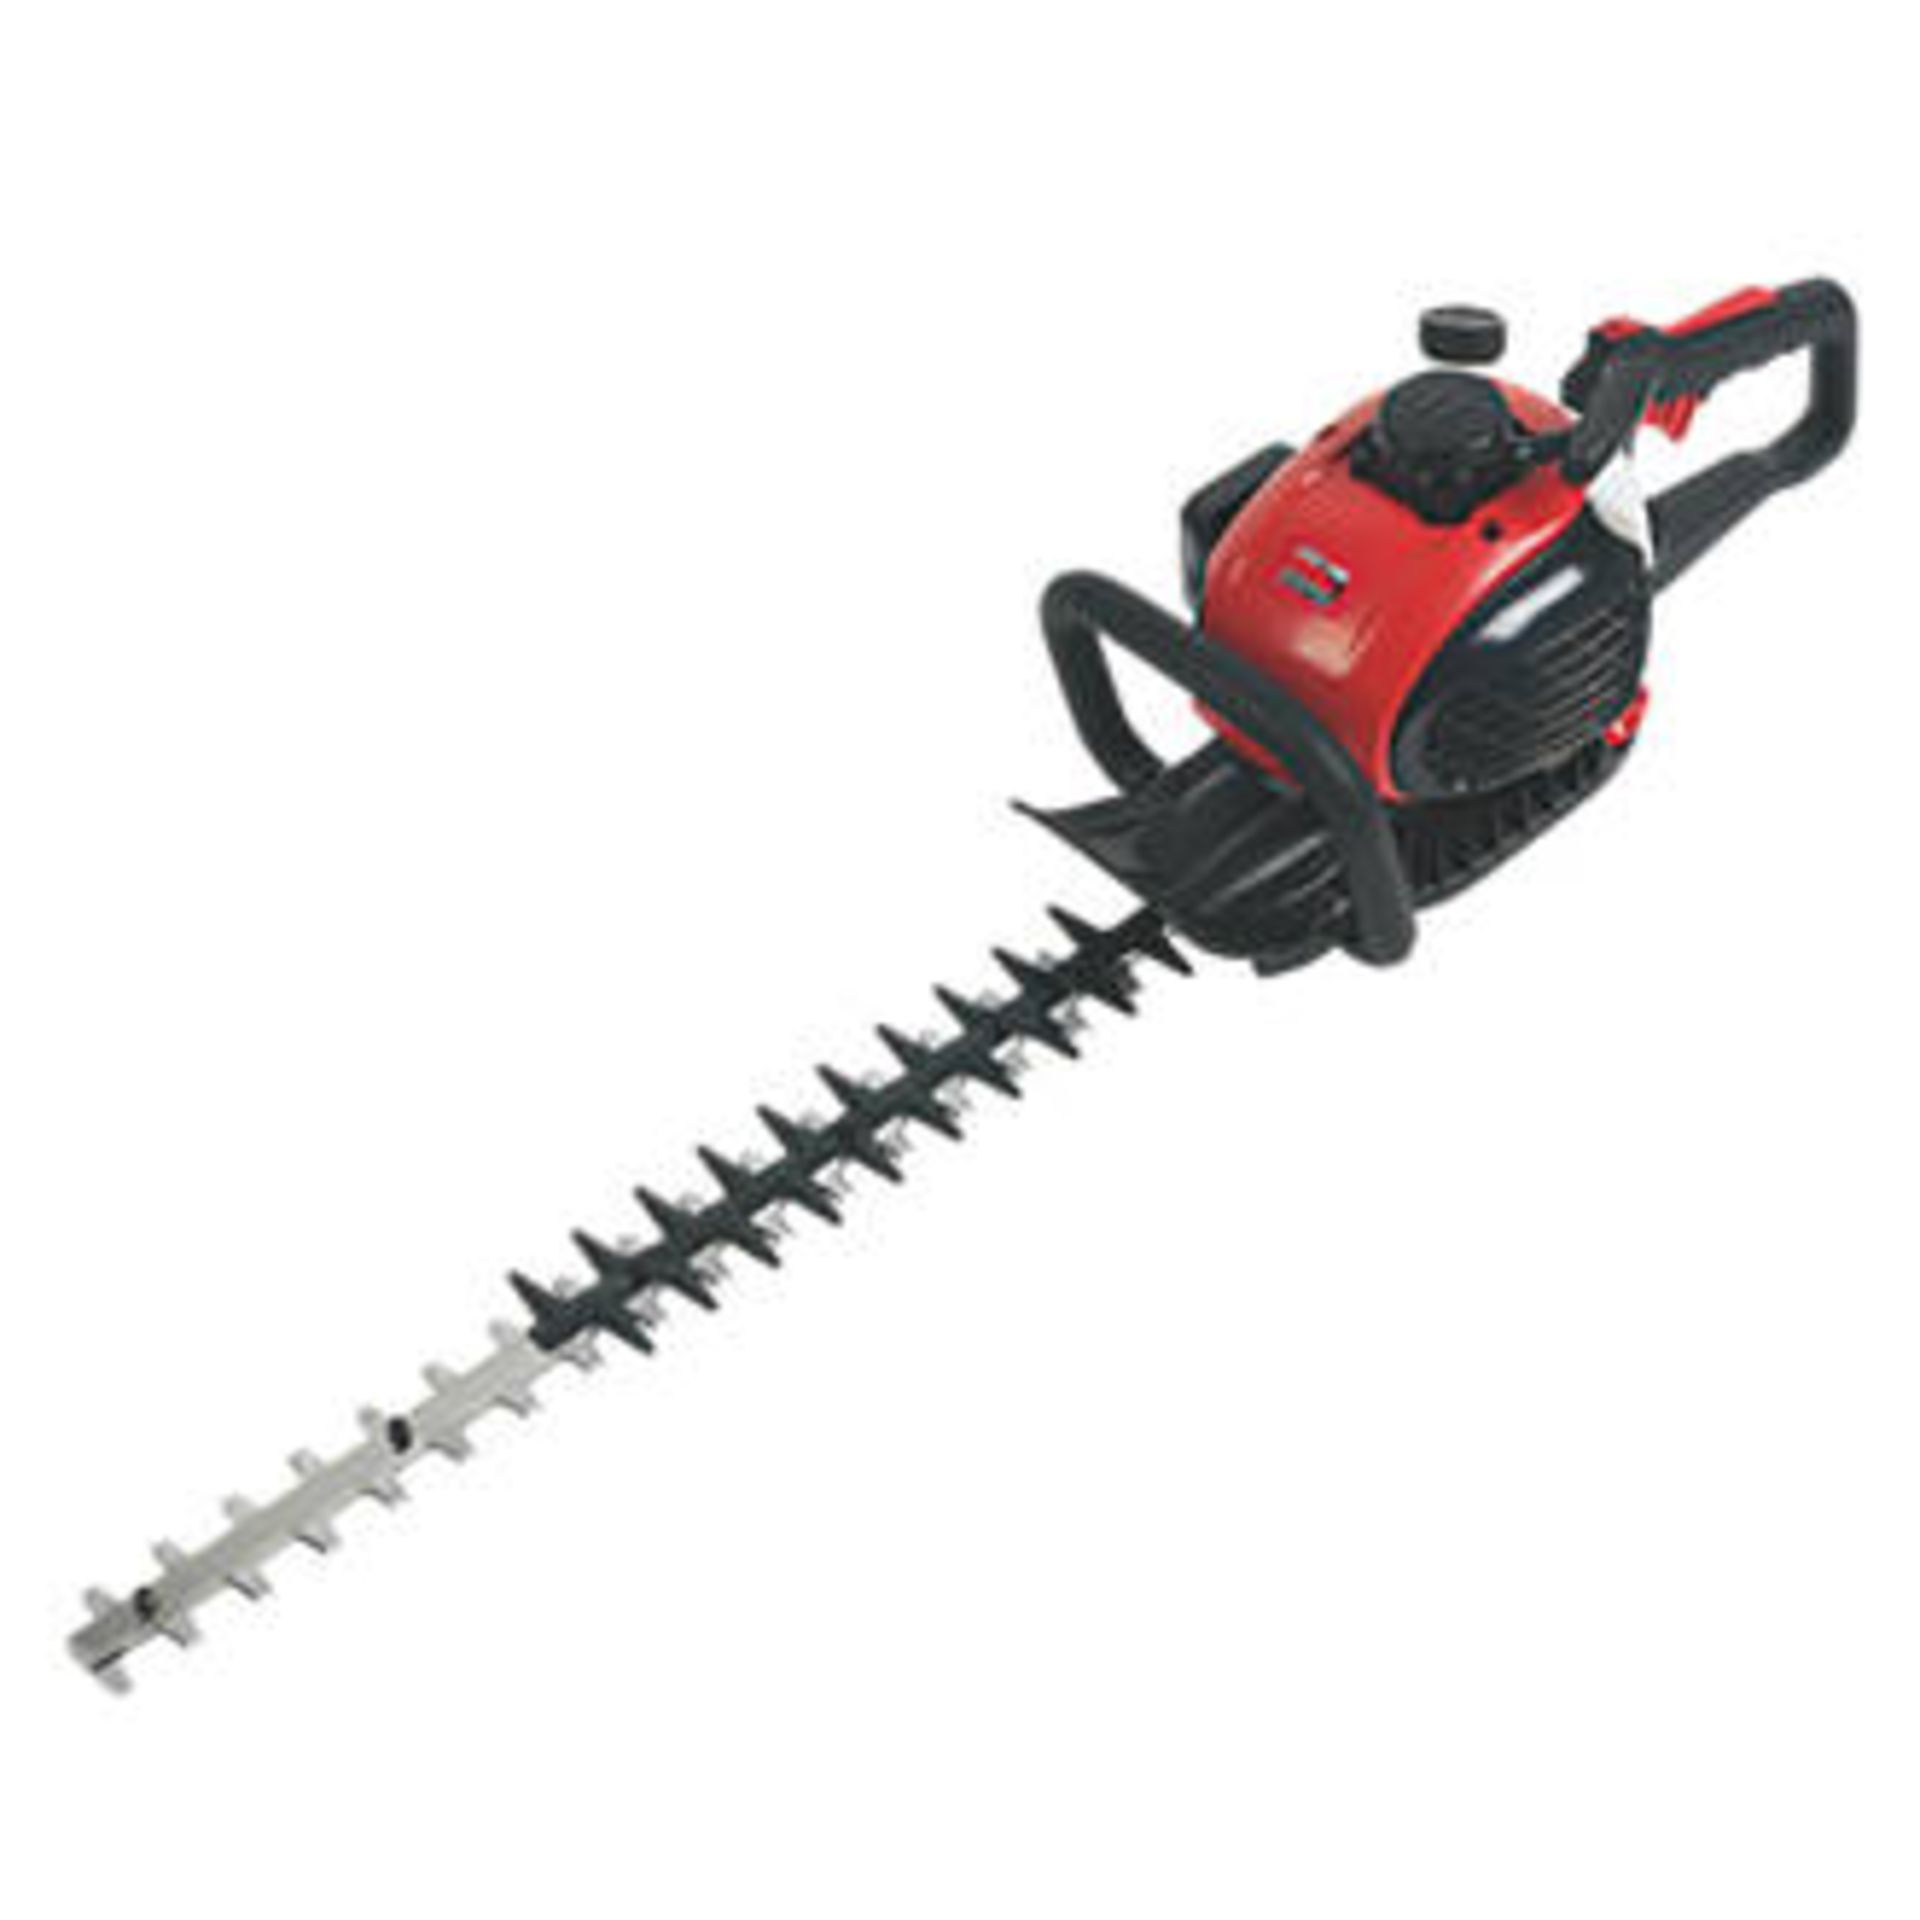 1 x BOXED MOUNTFIELD MHG2424 CORDLESS HEDGE TRIMMER RRP £80 (14.9.16) *PLEASE NOTE THAT THE BID